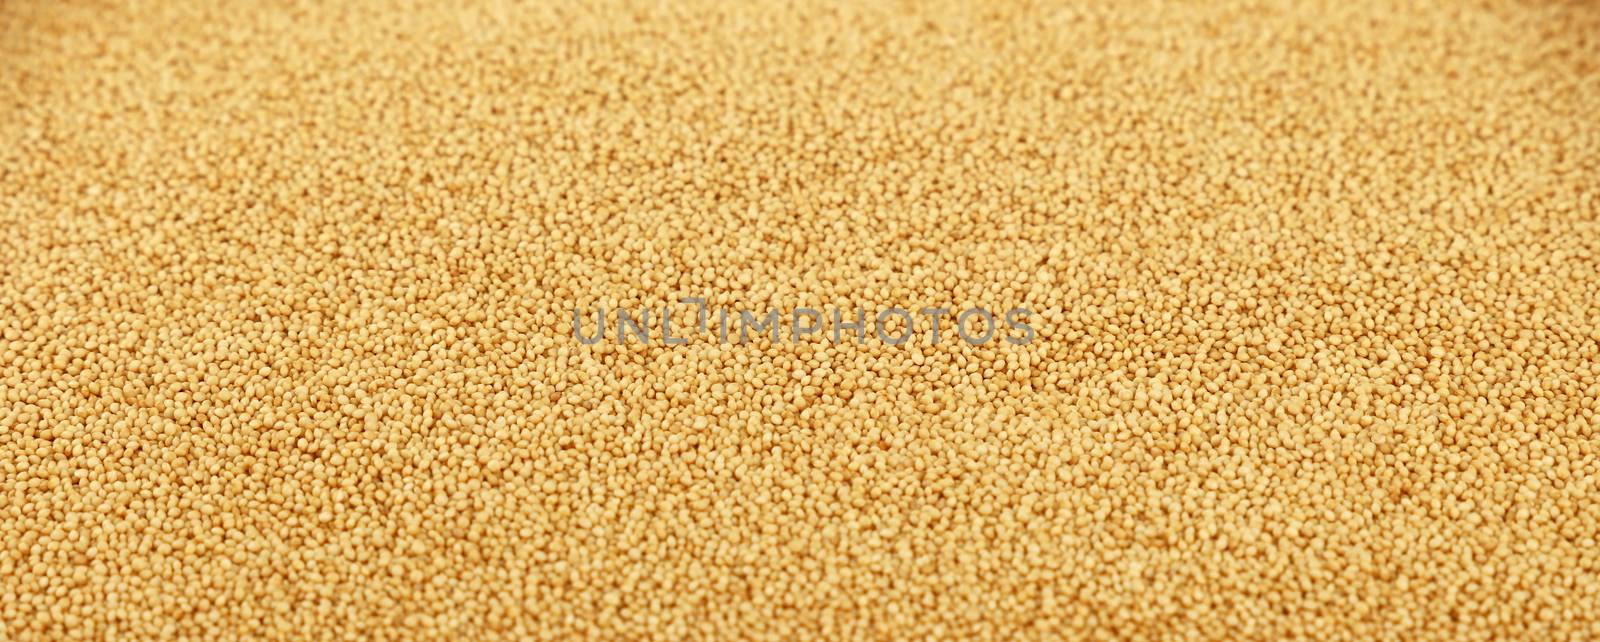 Amaranth grain seeds close up background by BreakingTheWalls